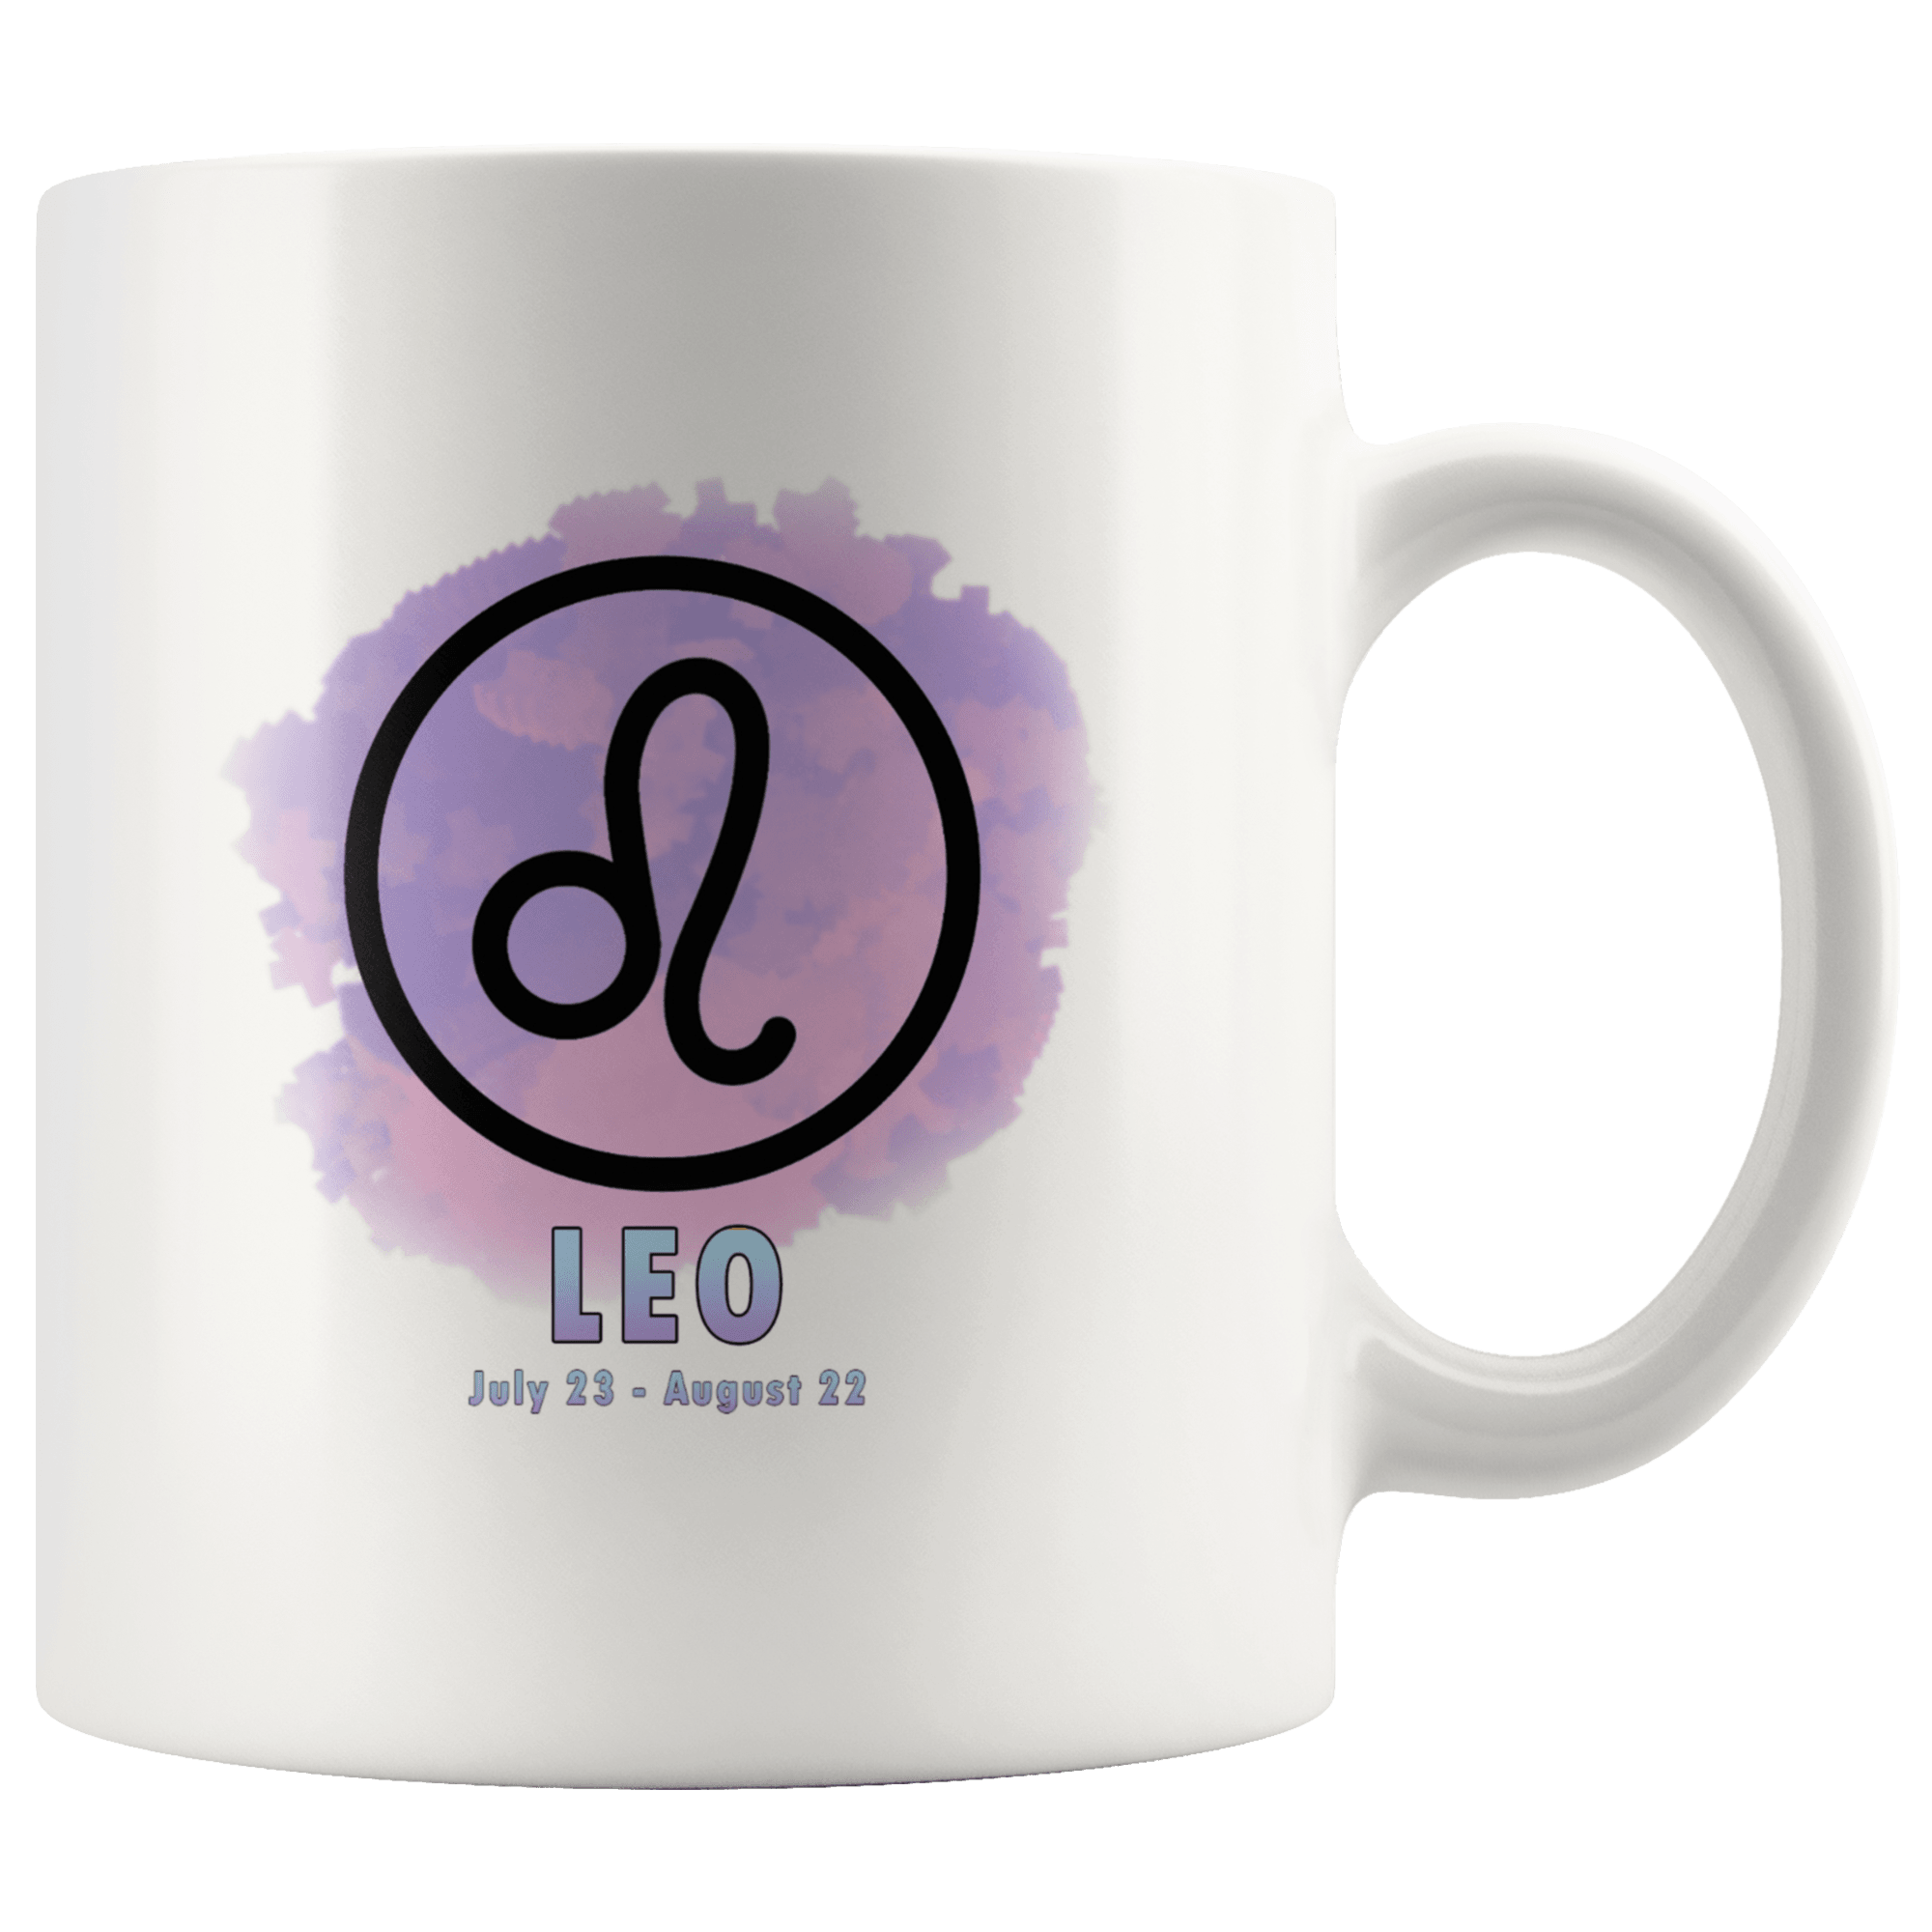 Leo Coffee Mug - Leo Constellation Coffee Cup - Zodiac Gifts For Horoscope Lover Born in July or August - SPCM